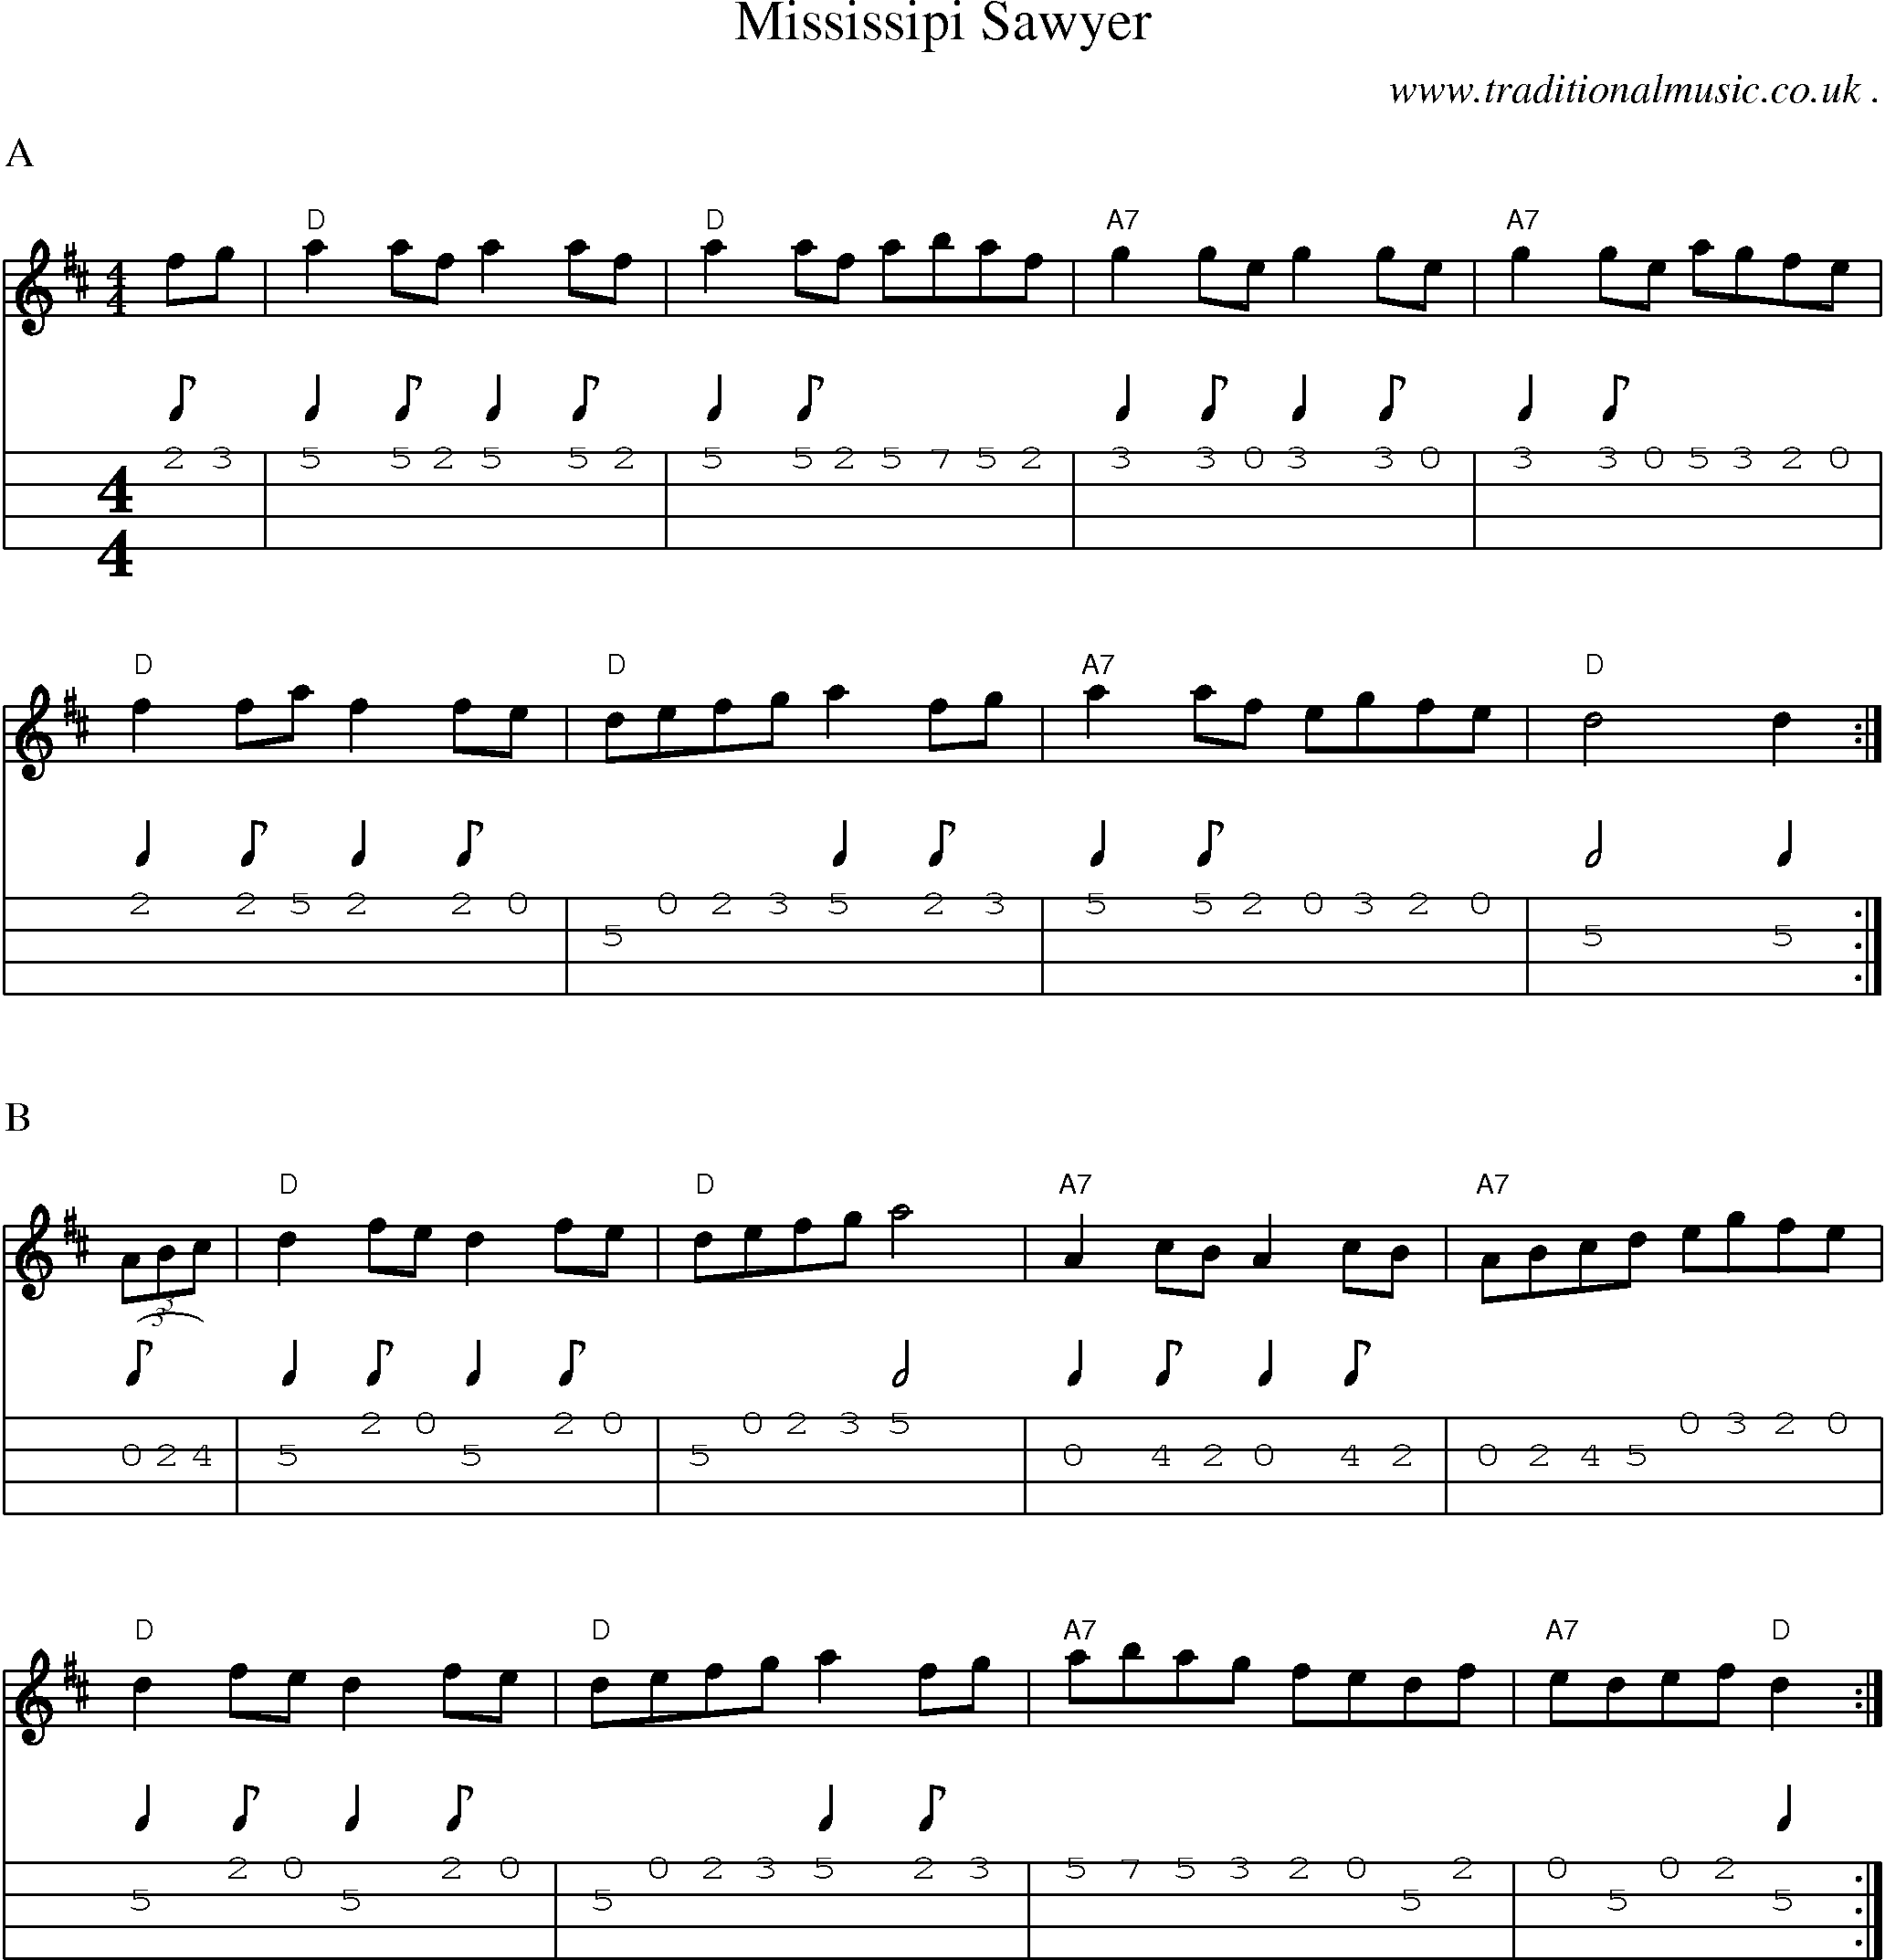 Music Score and Guitar Tabs for Mississipi Sawyer